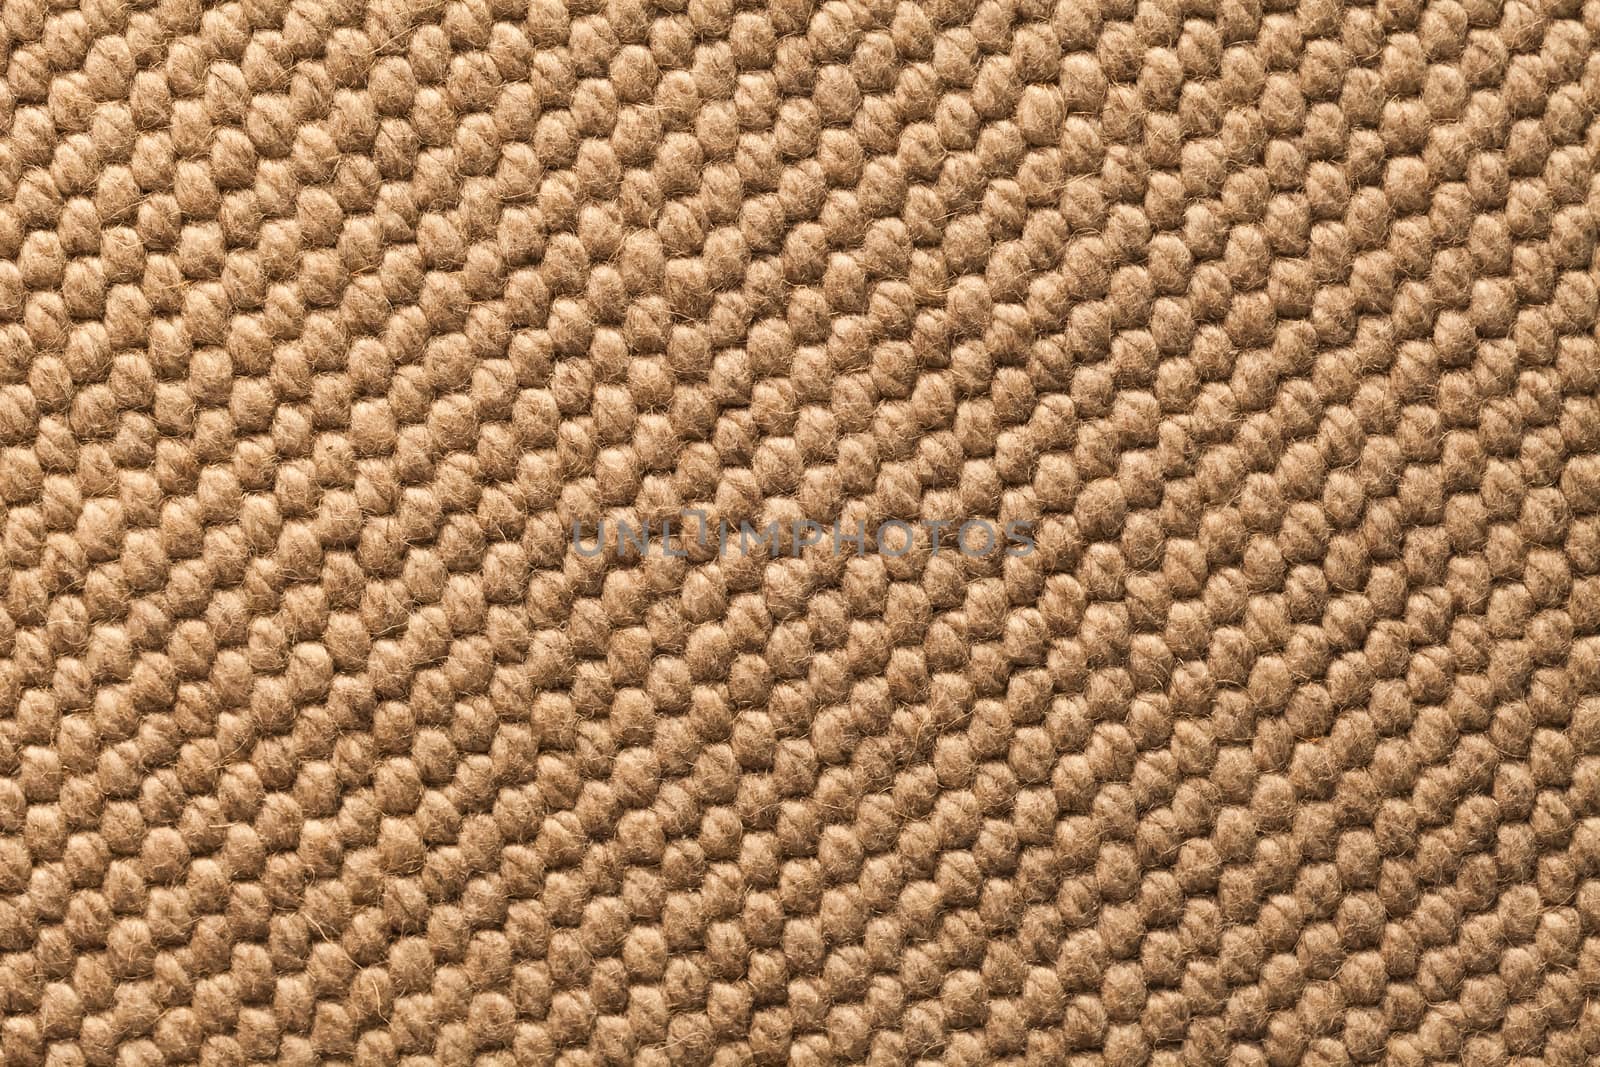 Raw textile material patter close-up